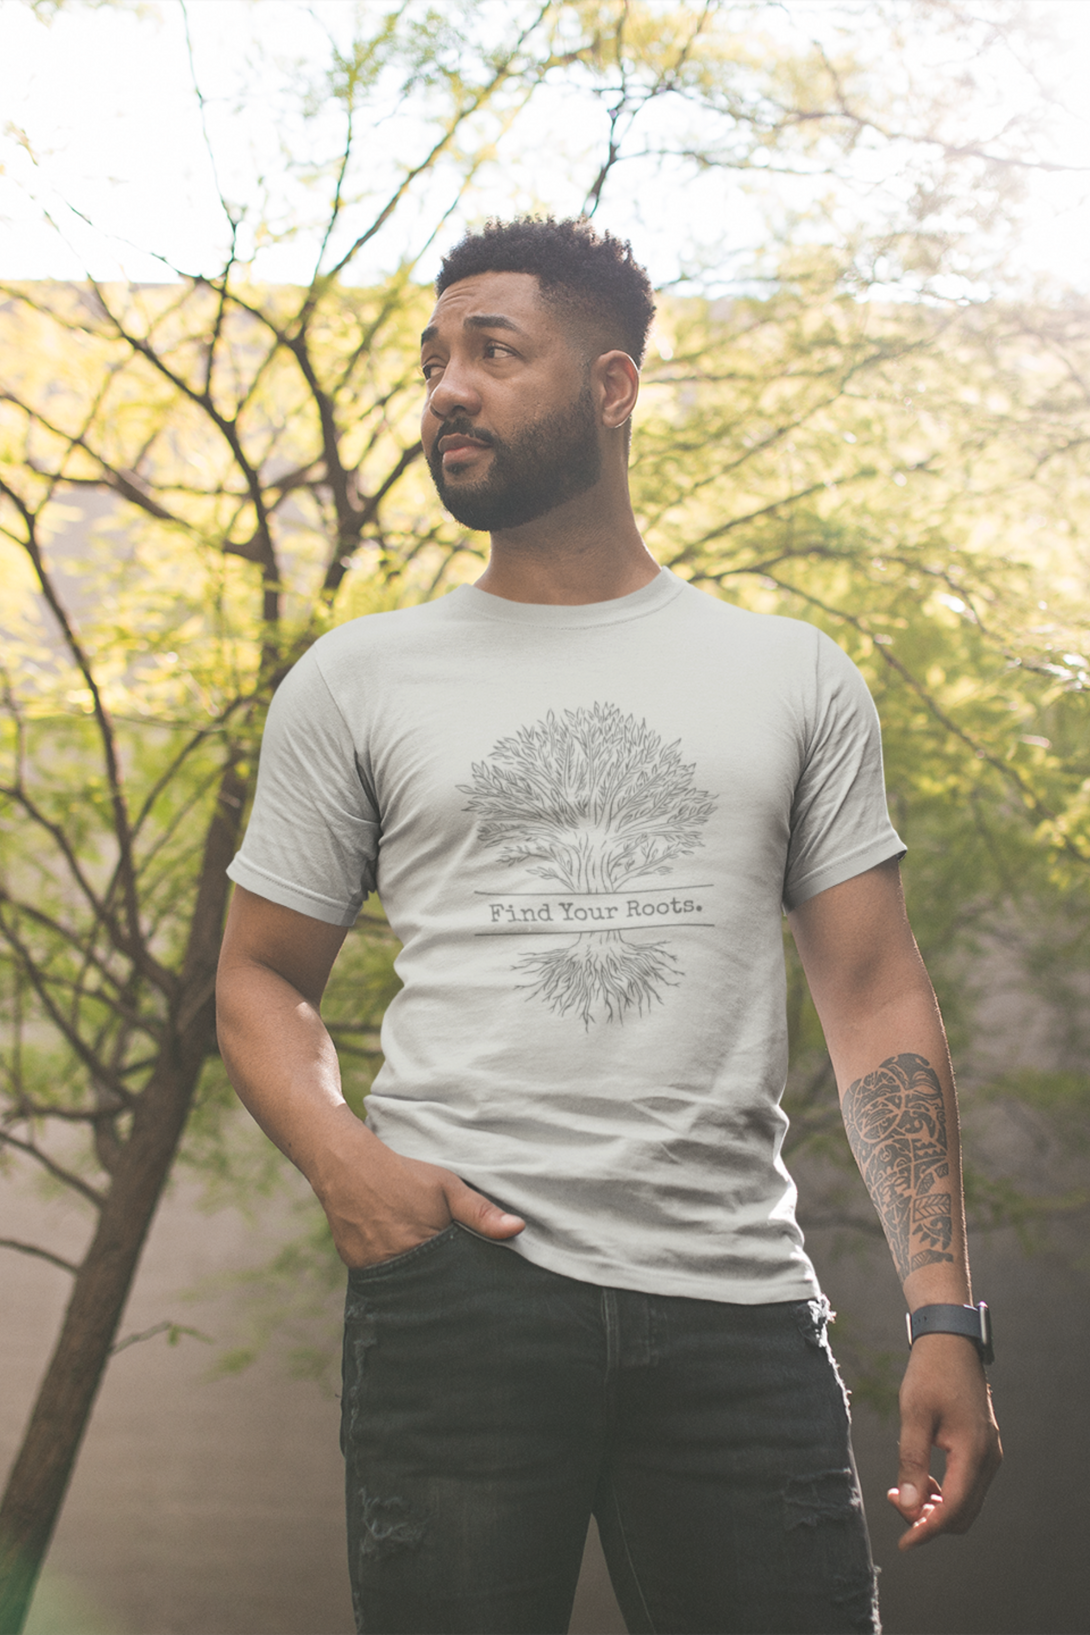 Find Your Roots Printed T-Shirt For Men - WowWaves - 4